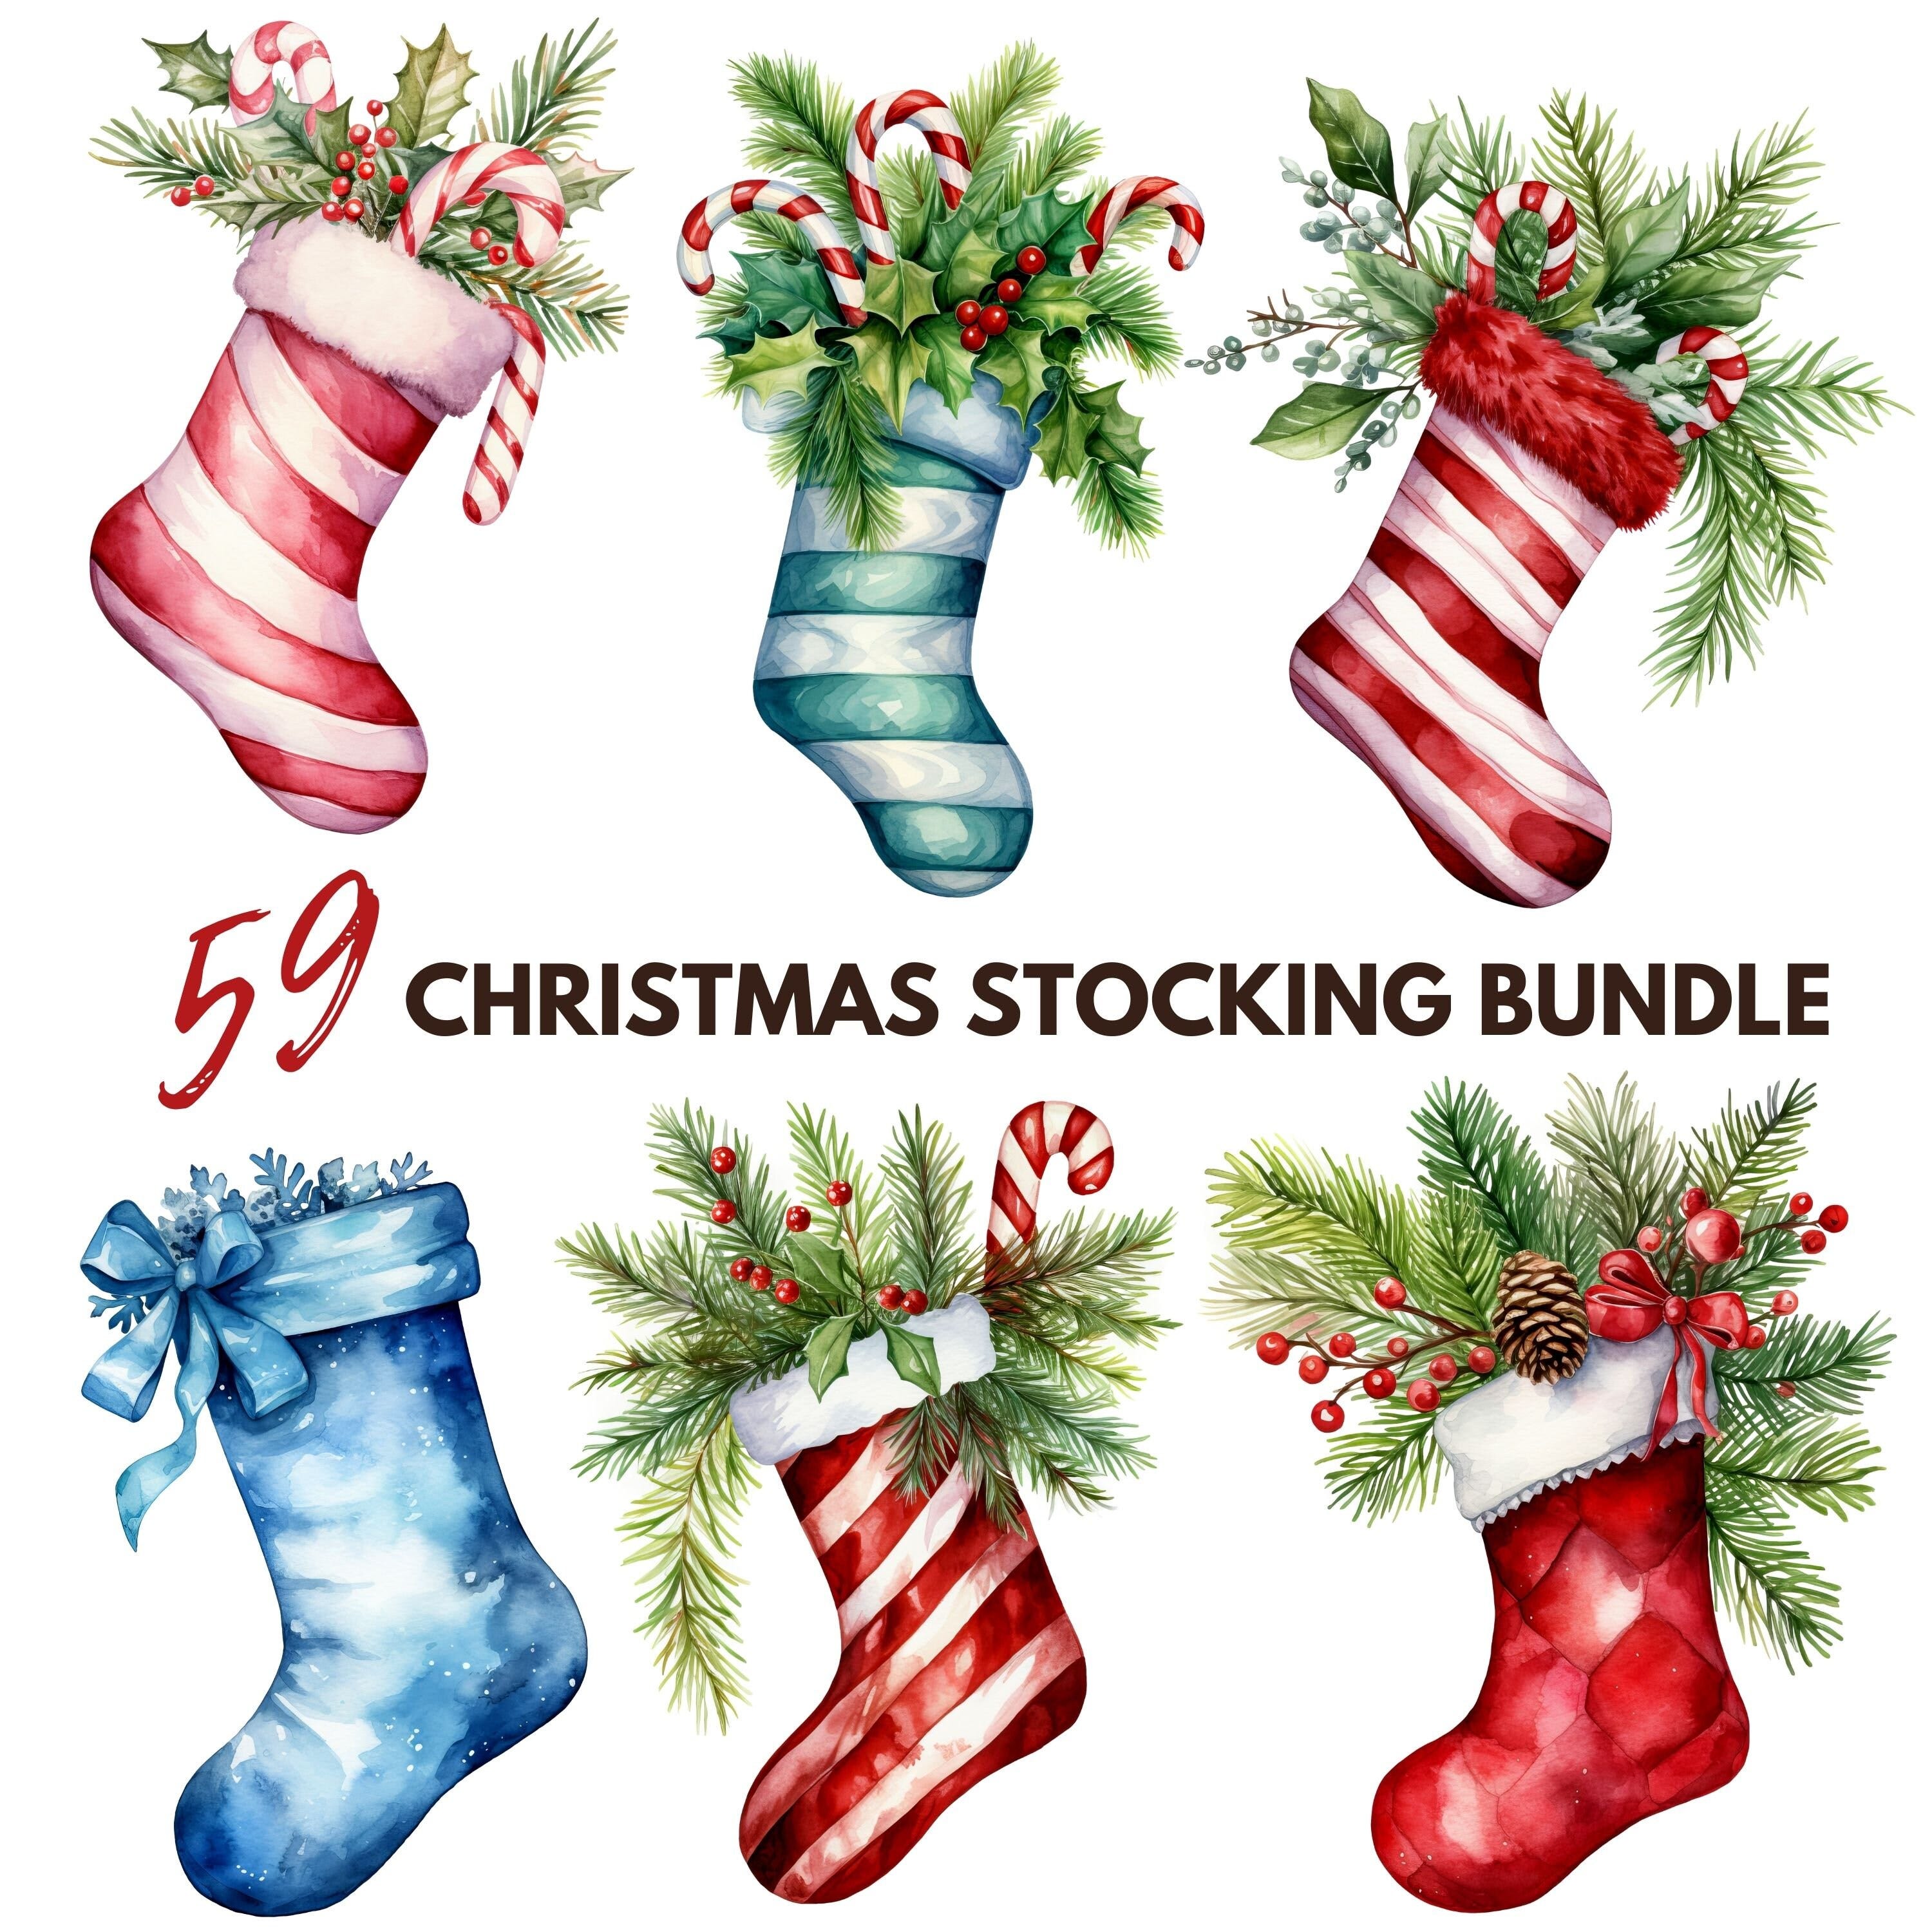 Christmas Stocking Bundle Watercolor Christmas Bundle Watercolor Christmas Sock Watercolor PNG & JPG Digital Download Commercial Use*